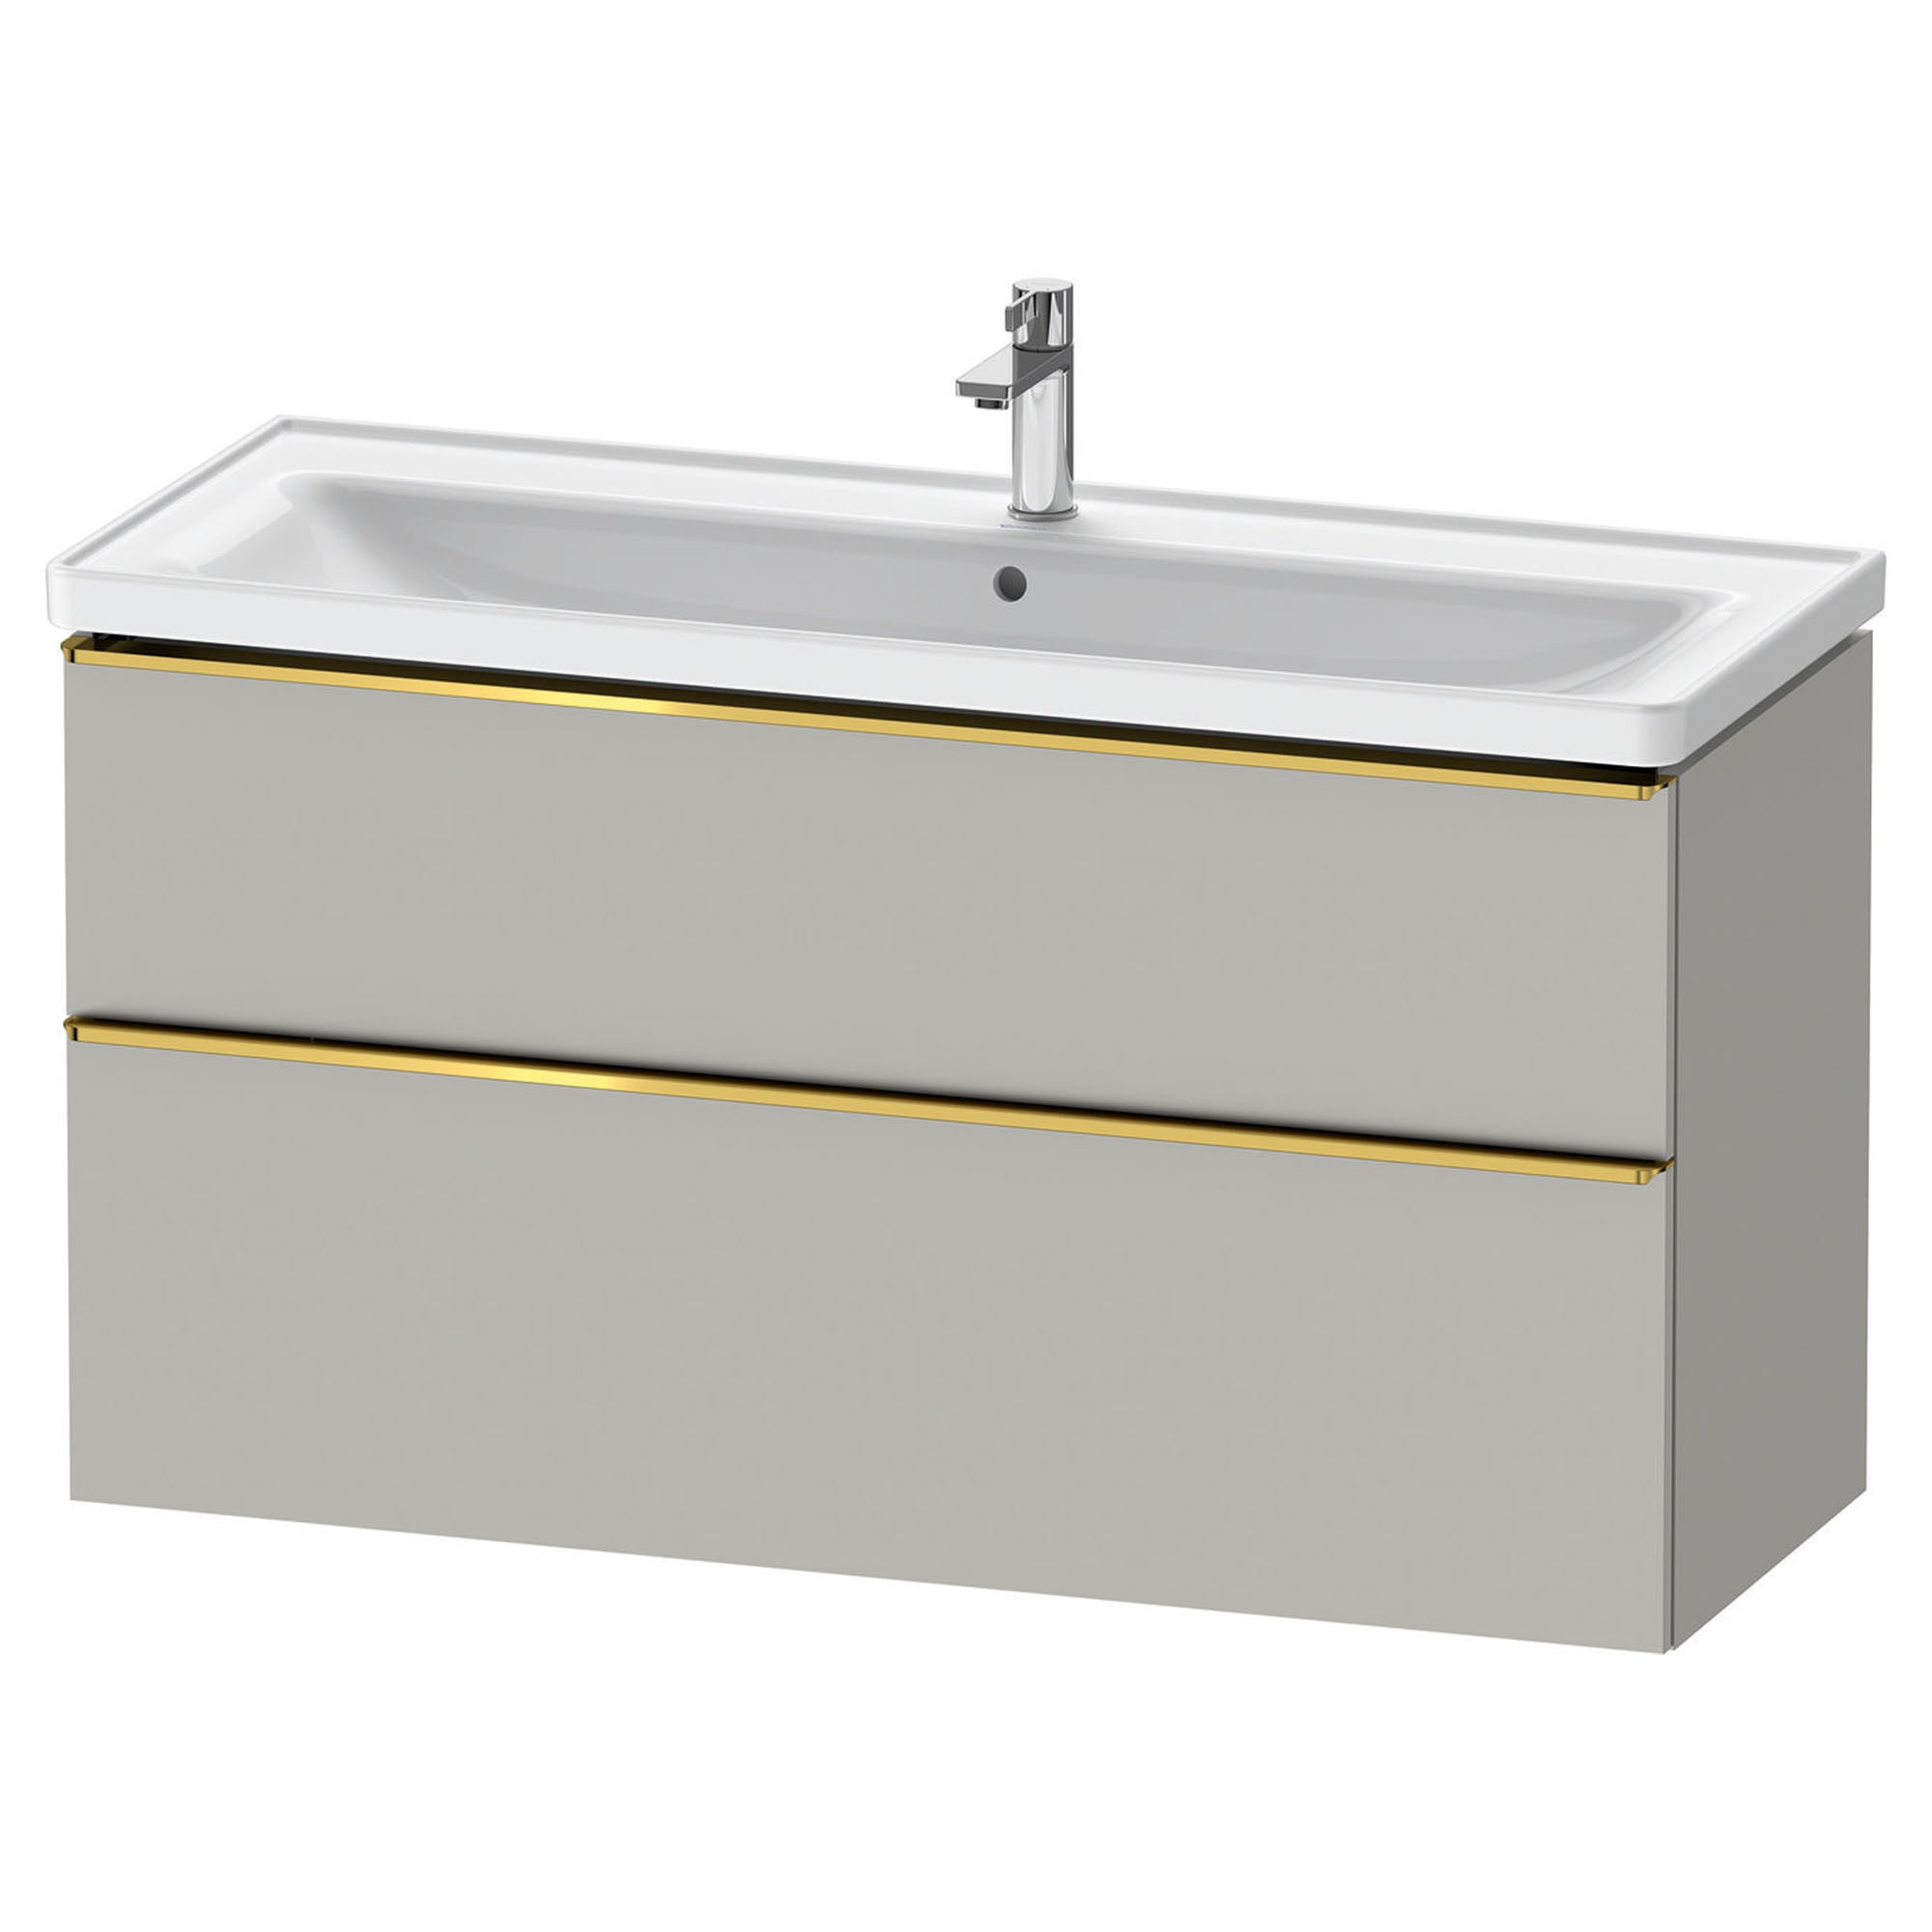 duravit d-neo 1200mm wall mounted vanity unit with d-neo basin concrete grey gold handles